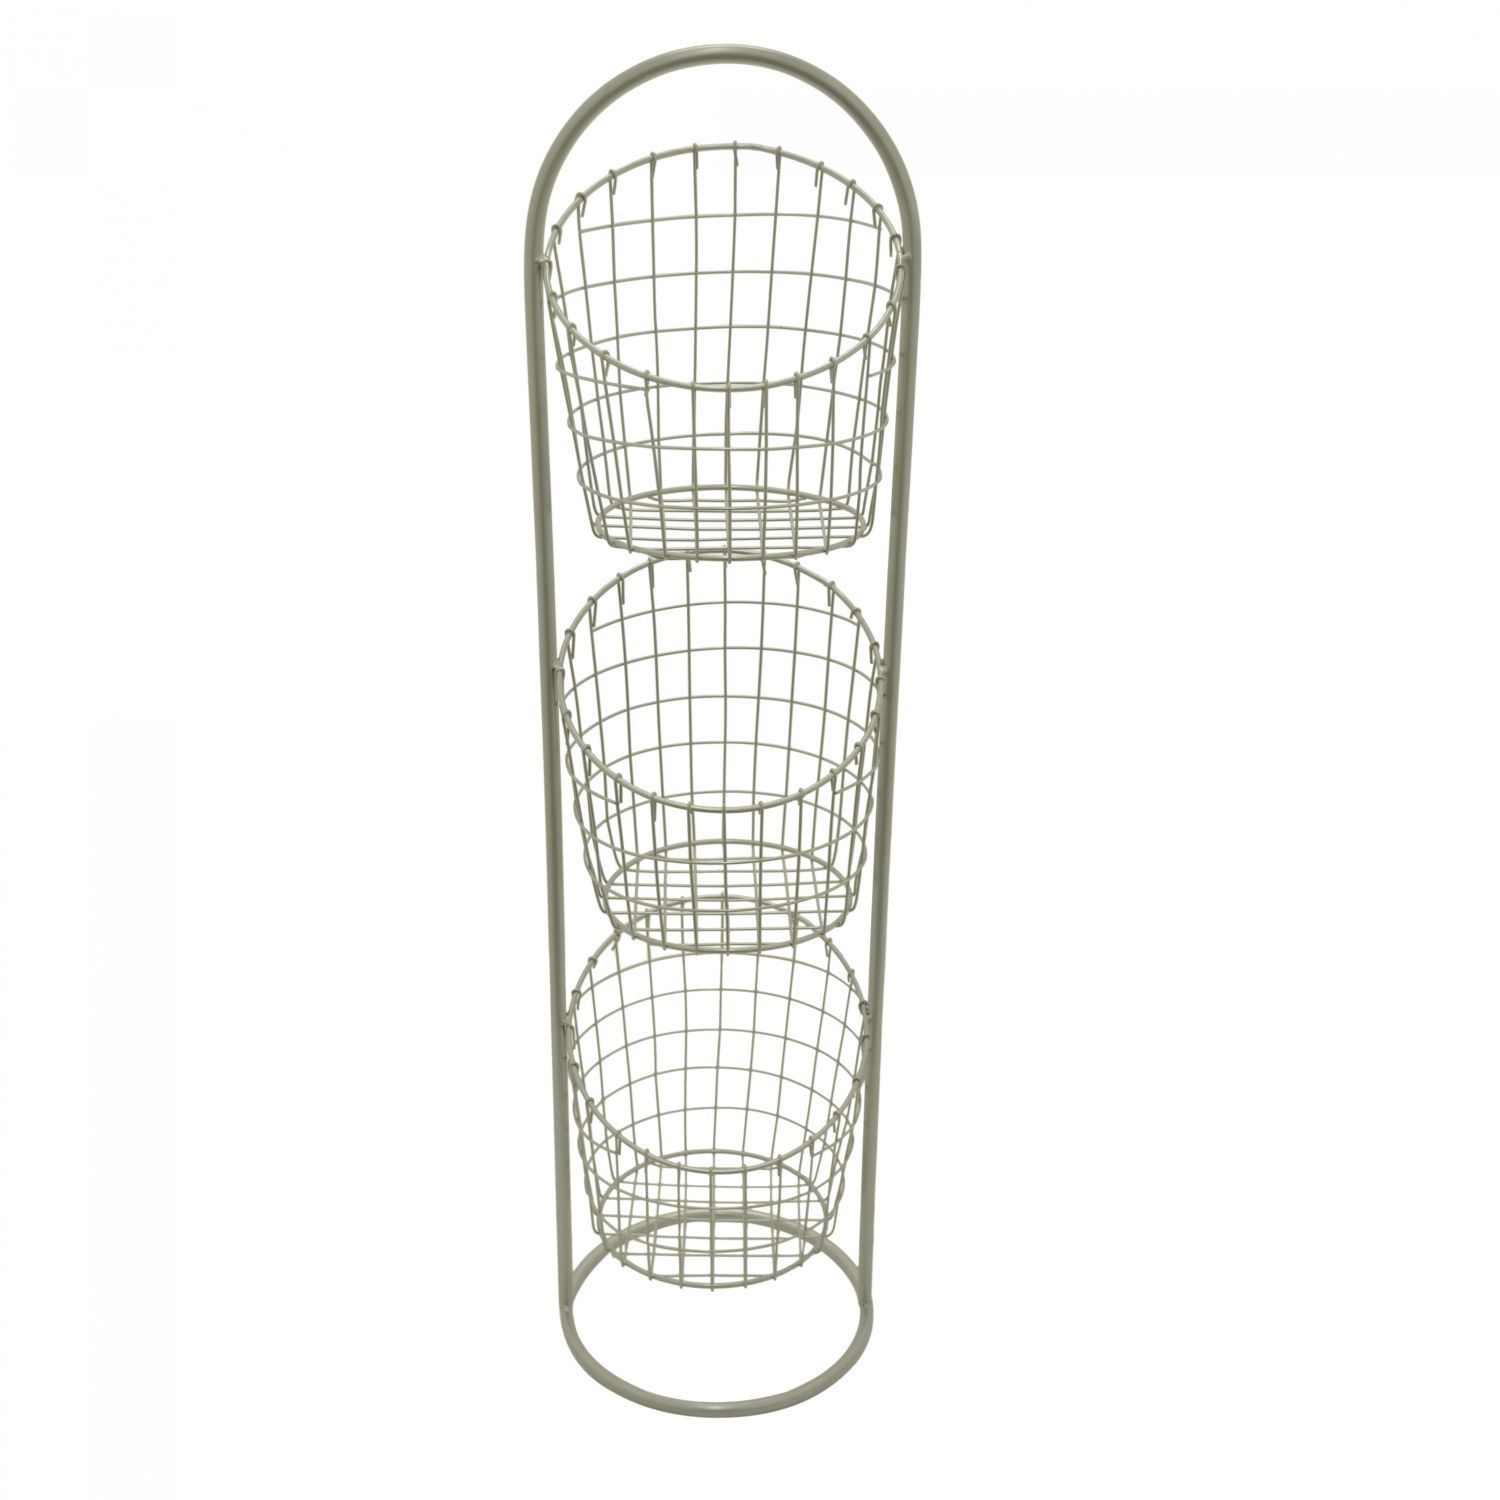 3 Tier Metal Rack | 173 47177 | Wall Décor | Afw Intended For Three Glass Holder Wall Decor (View 18 of 30)